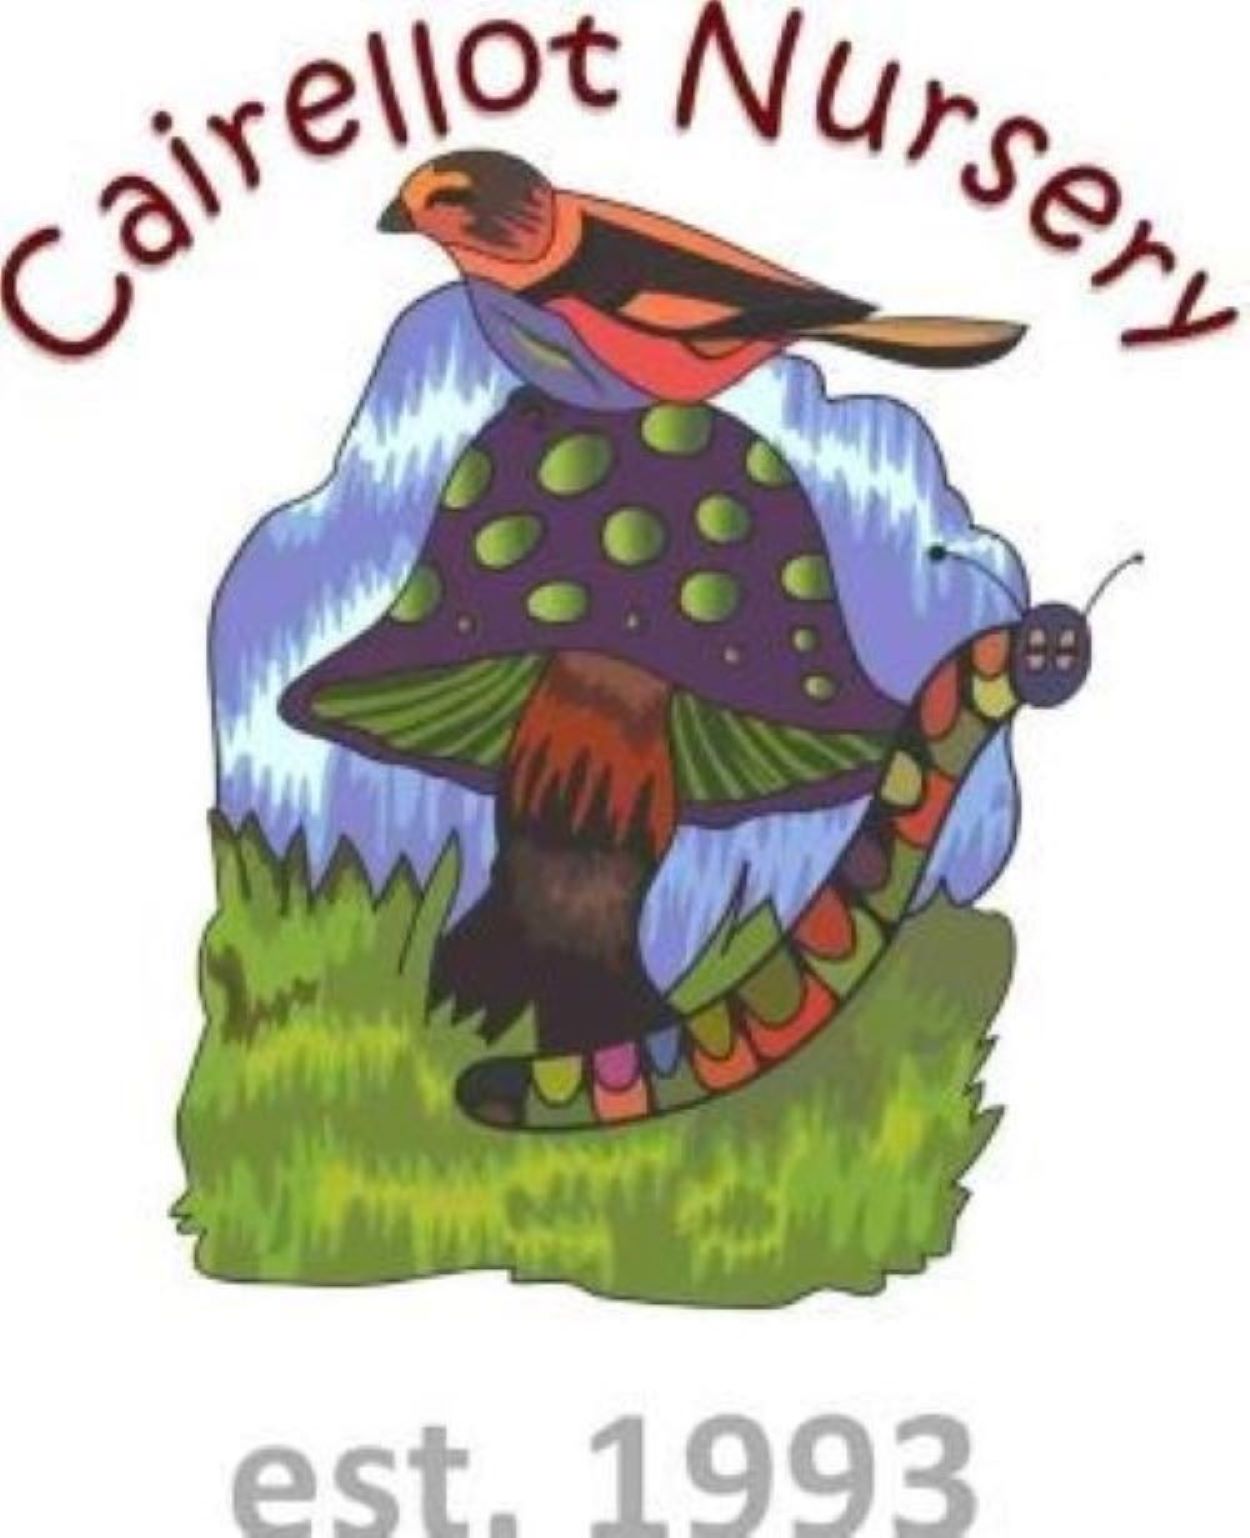 logo for Cairellot Nursery and Learning Centre